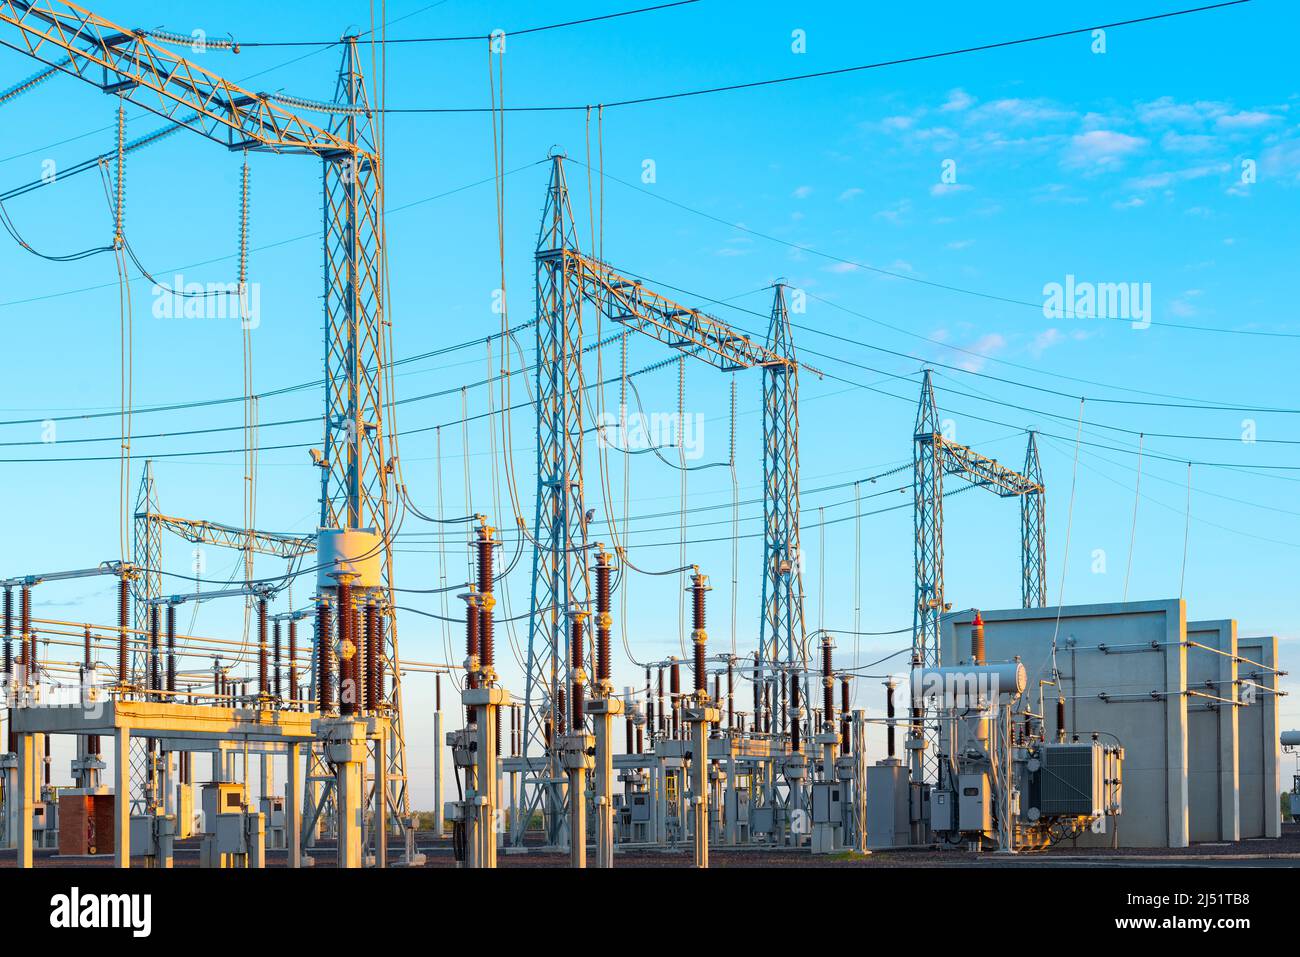 Power Transformer in High Voltage Electrical Outdoor Substation Stock Photo